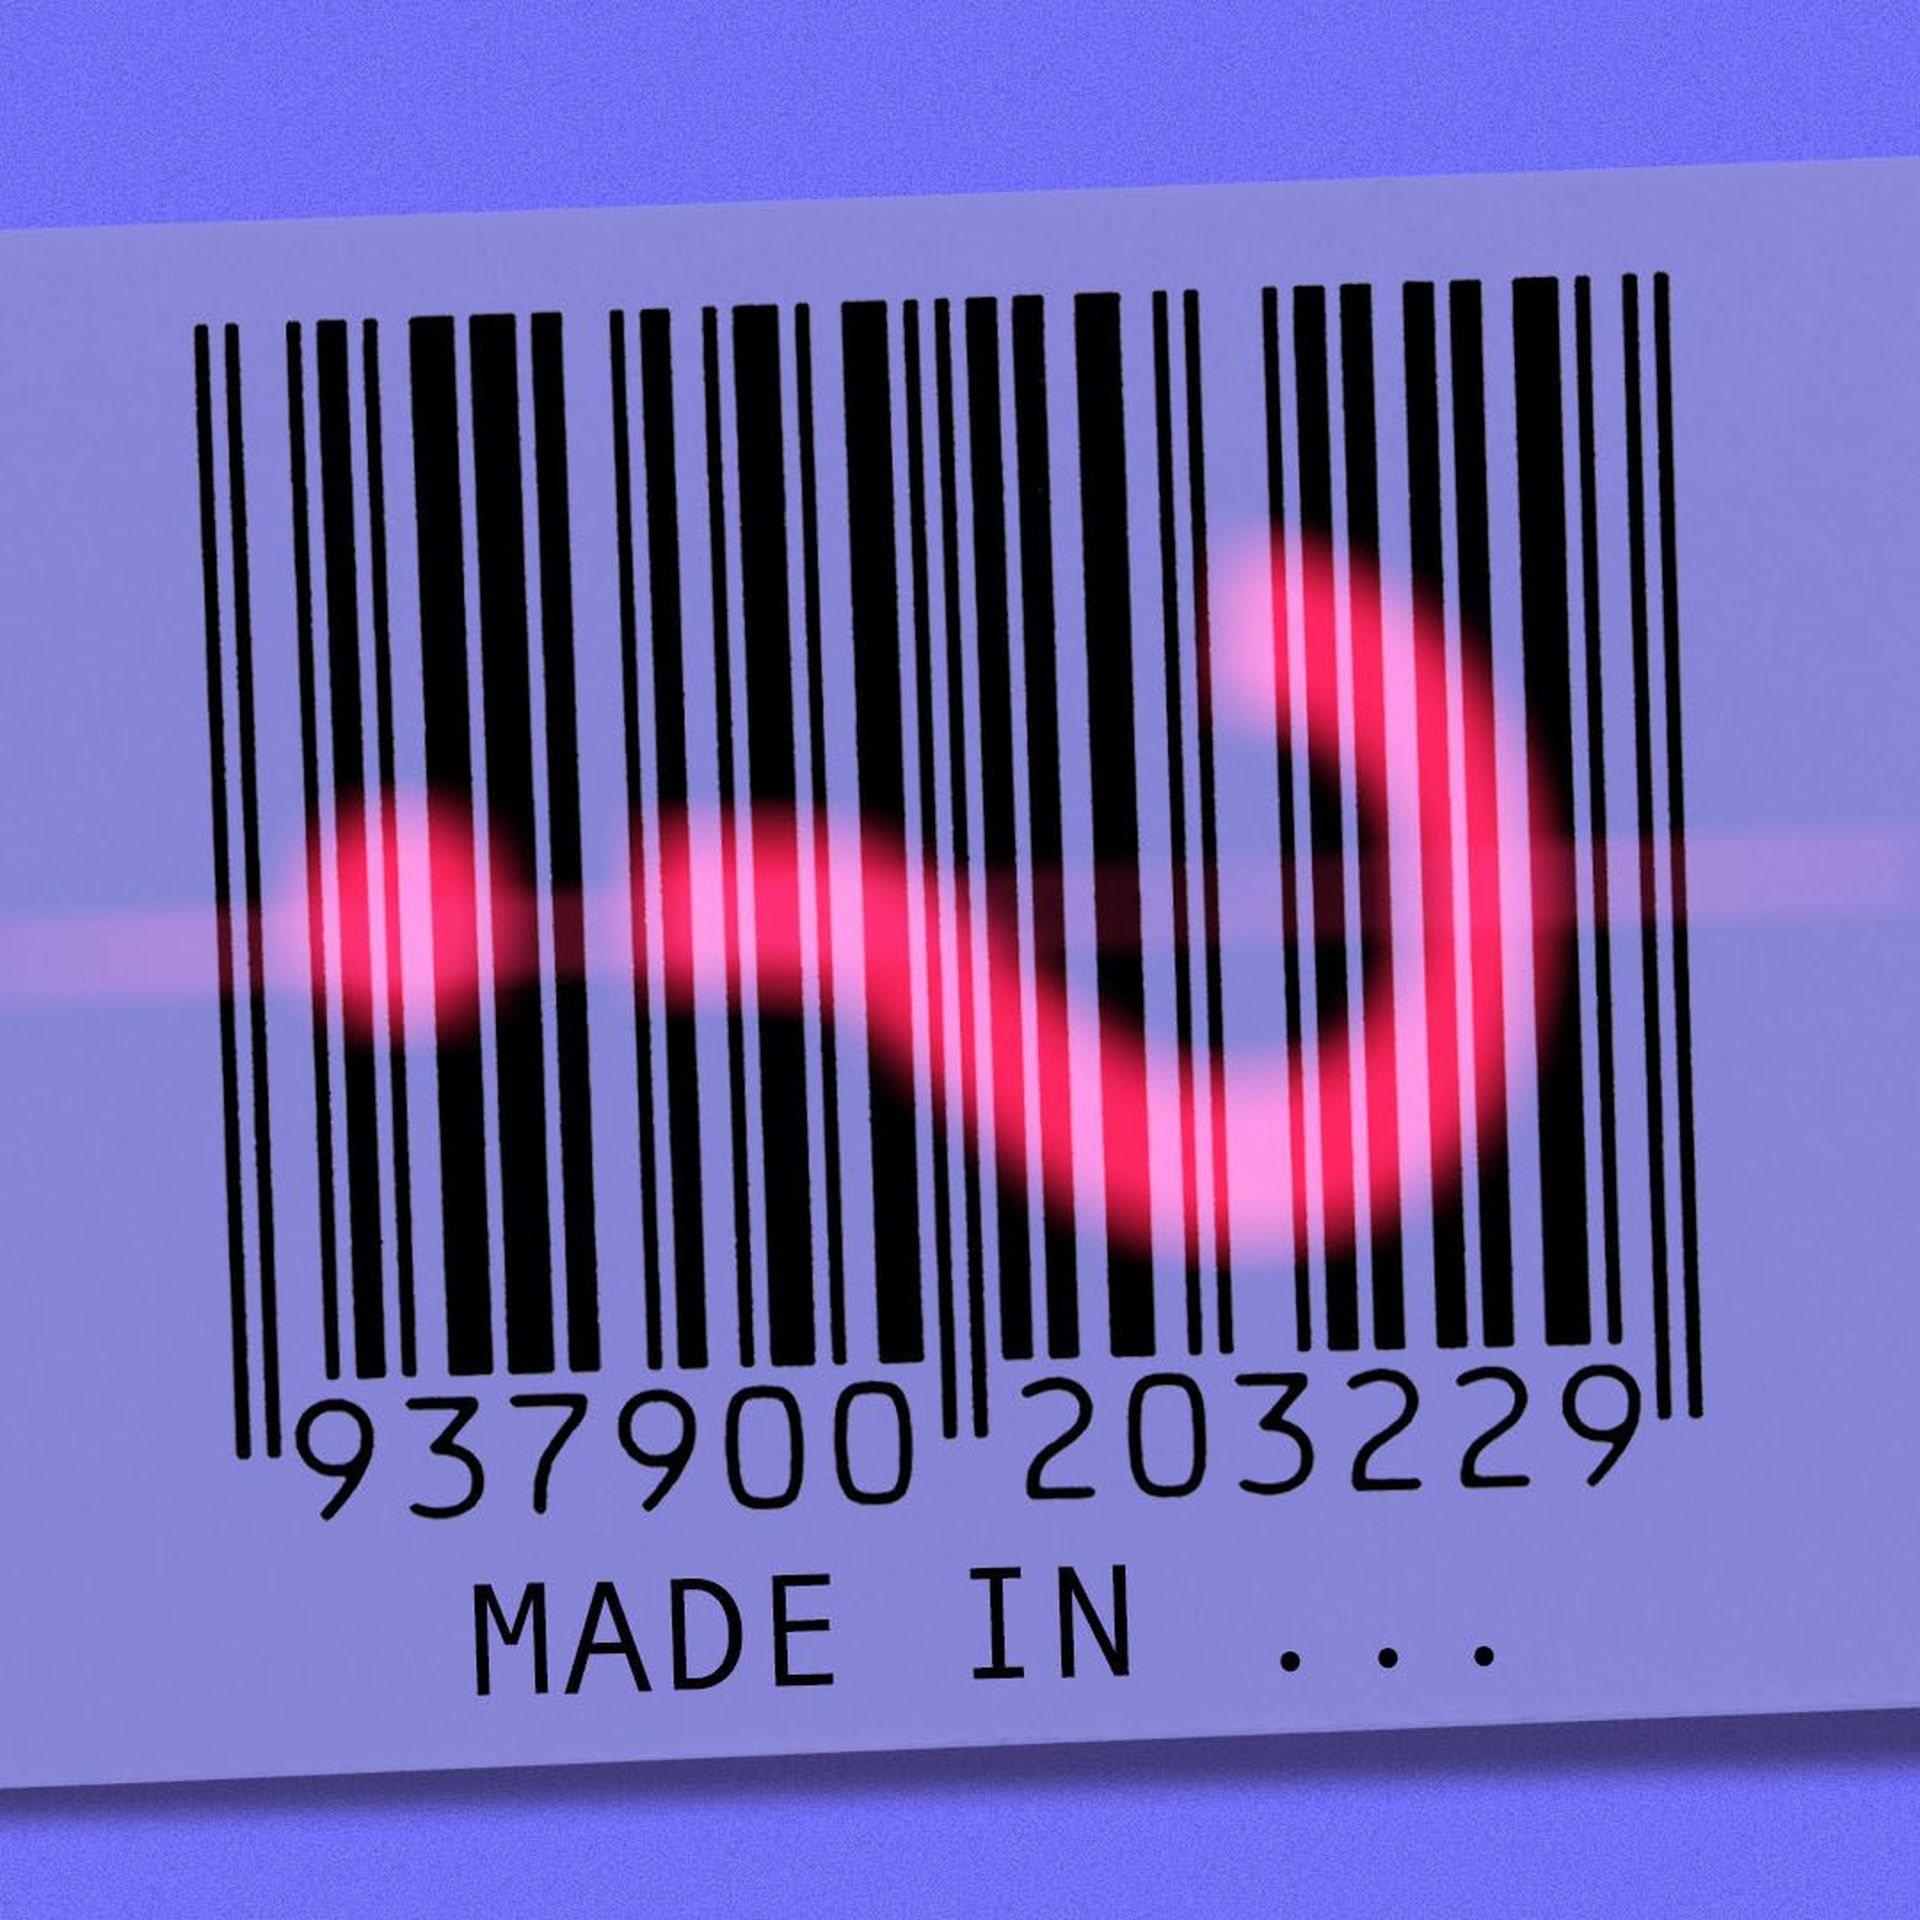 Illustration of a barcode on a tag with a laser beam in the shape of a question mark